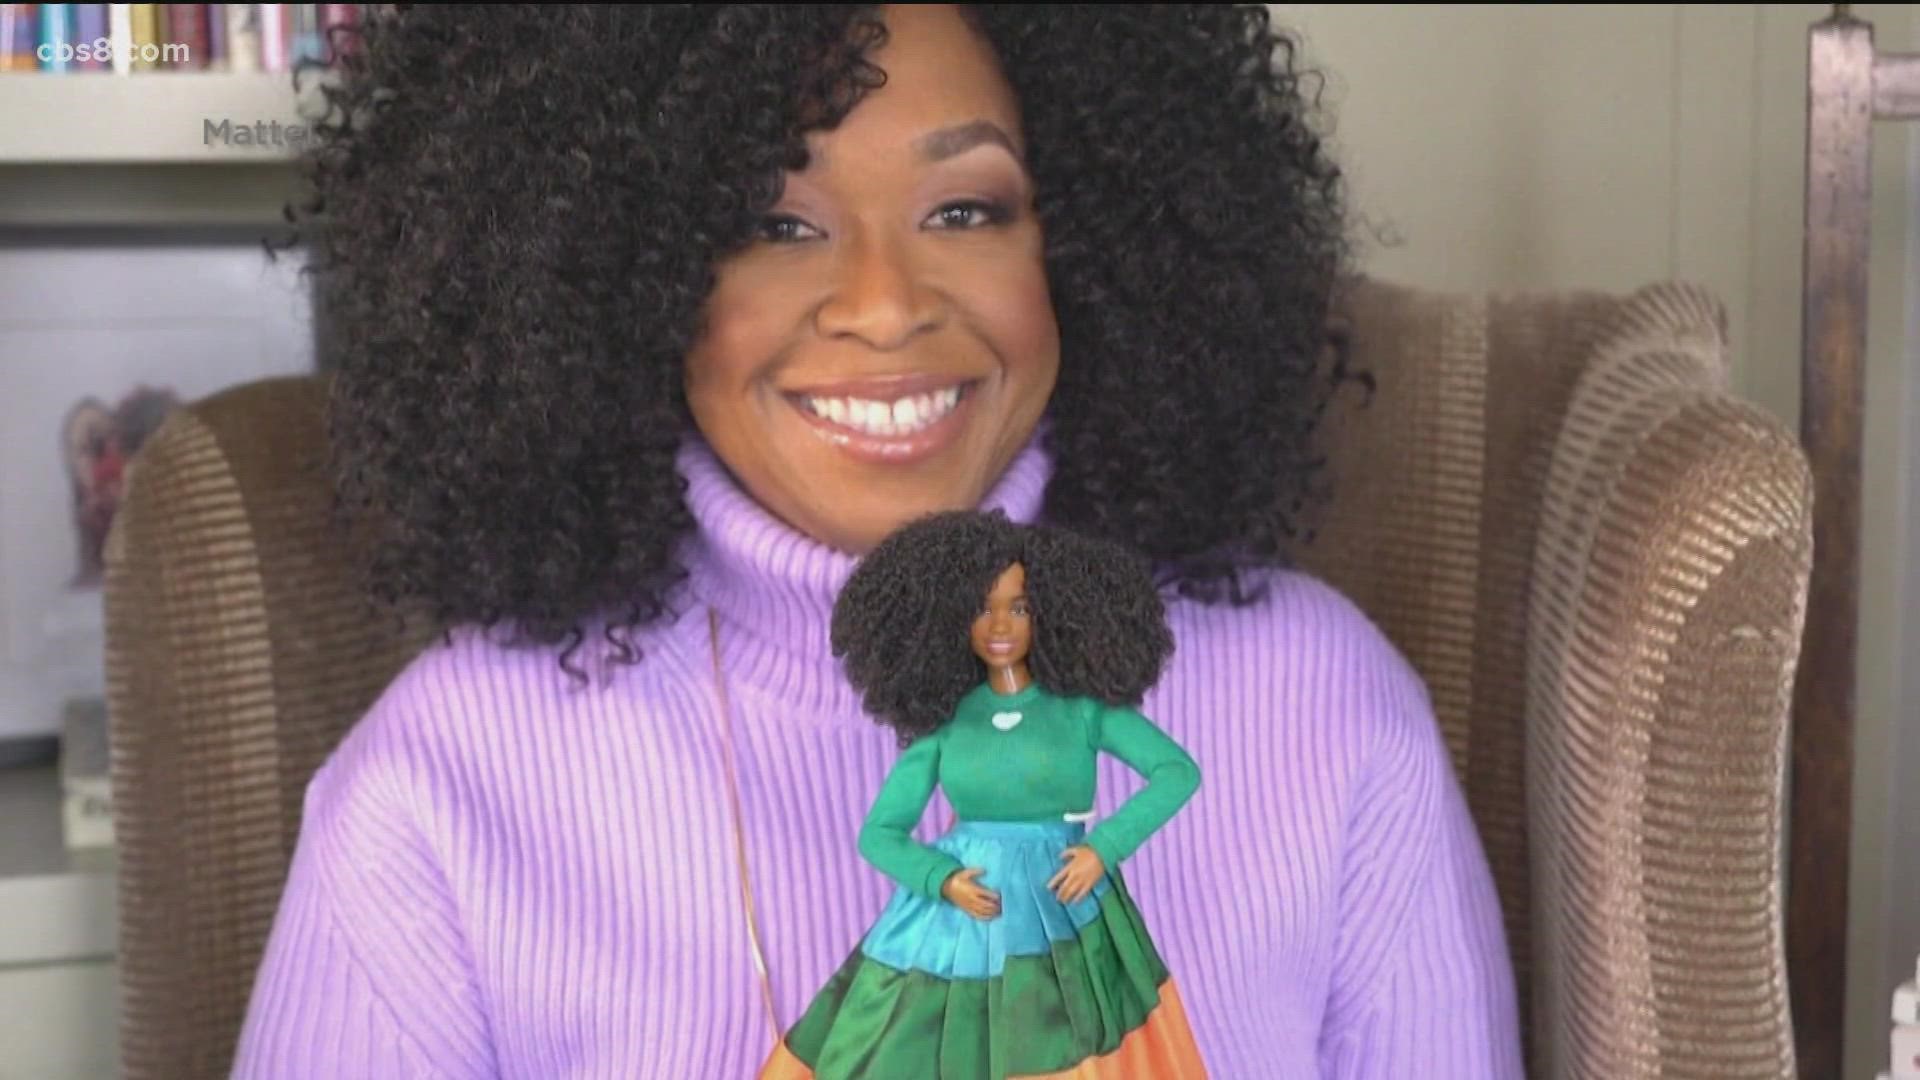 Shonda Rhimes said on social media she's proud to be among the women who are breaking barriers in their careers.